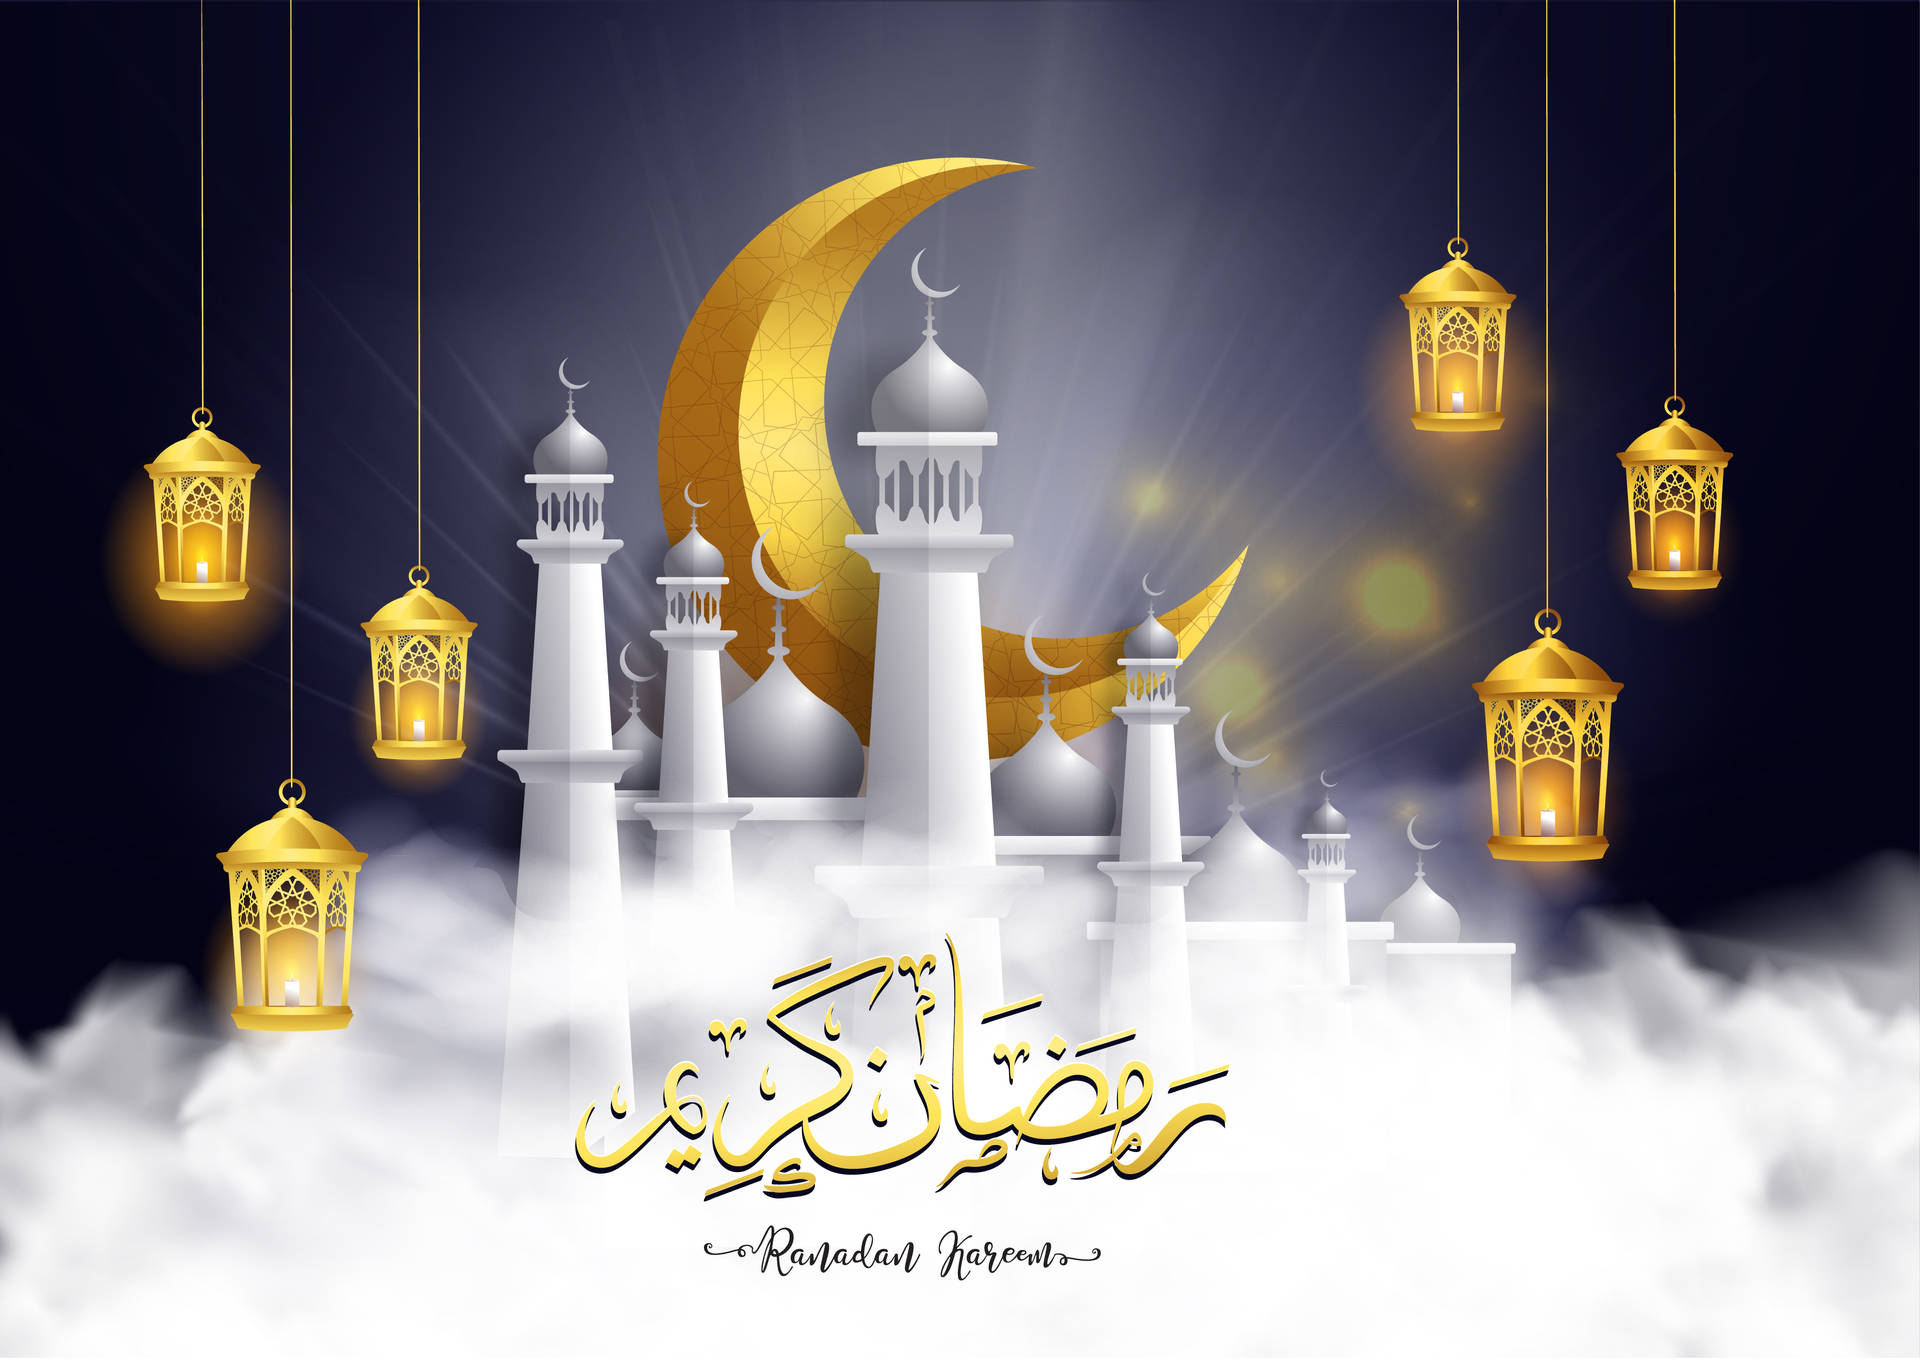 Celebrating Eid - A Beautiful View Of The Crescent Moon Against Magnificent Islamic Architecture Wallpaper